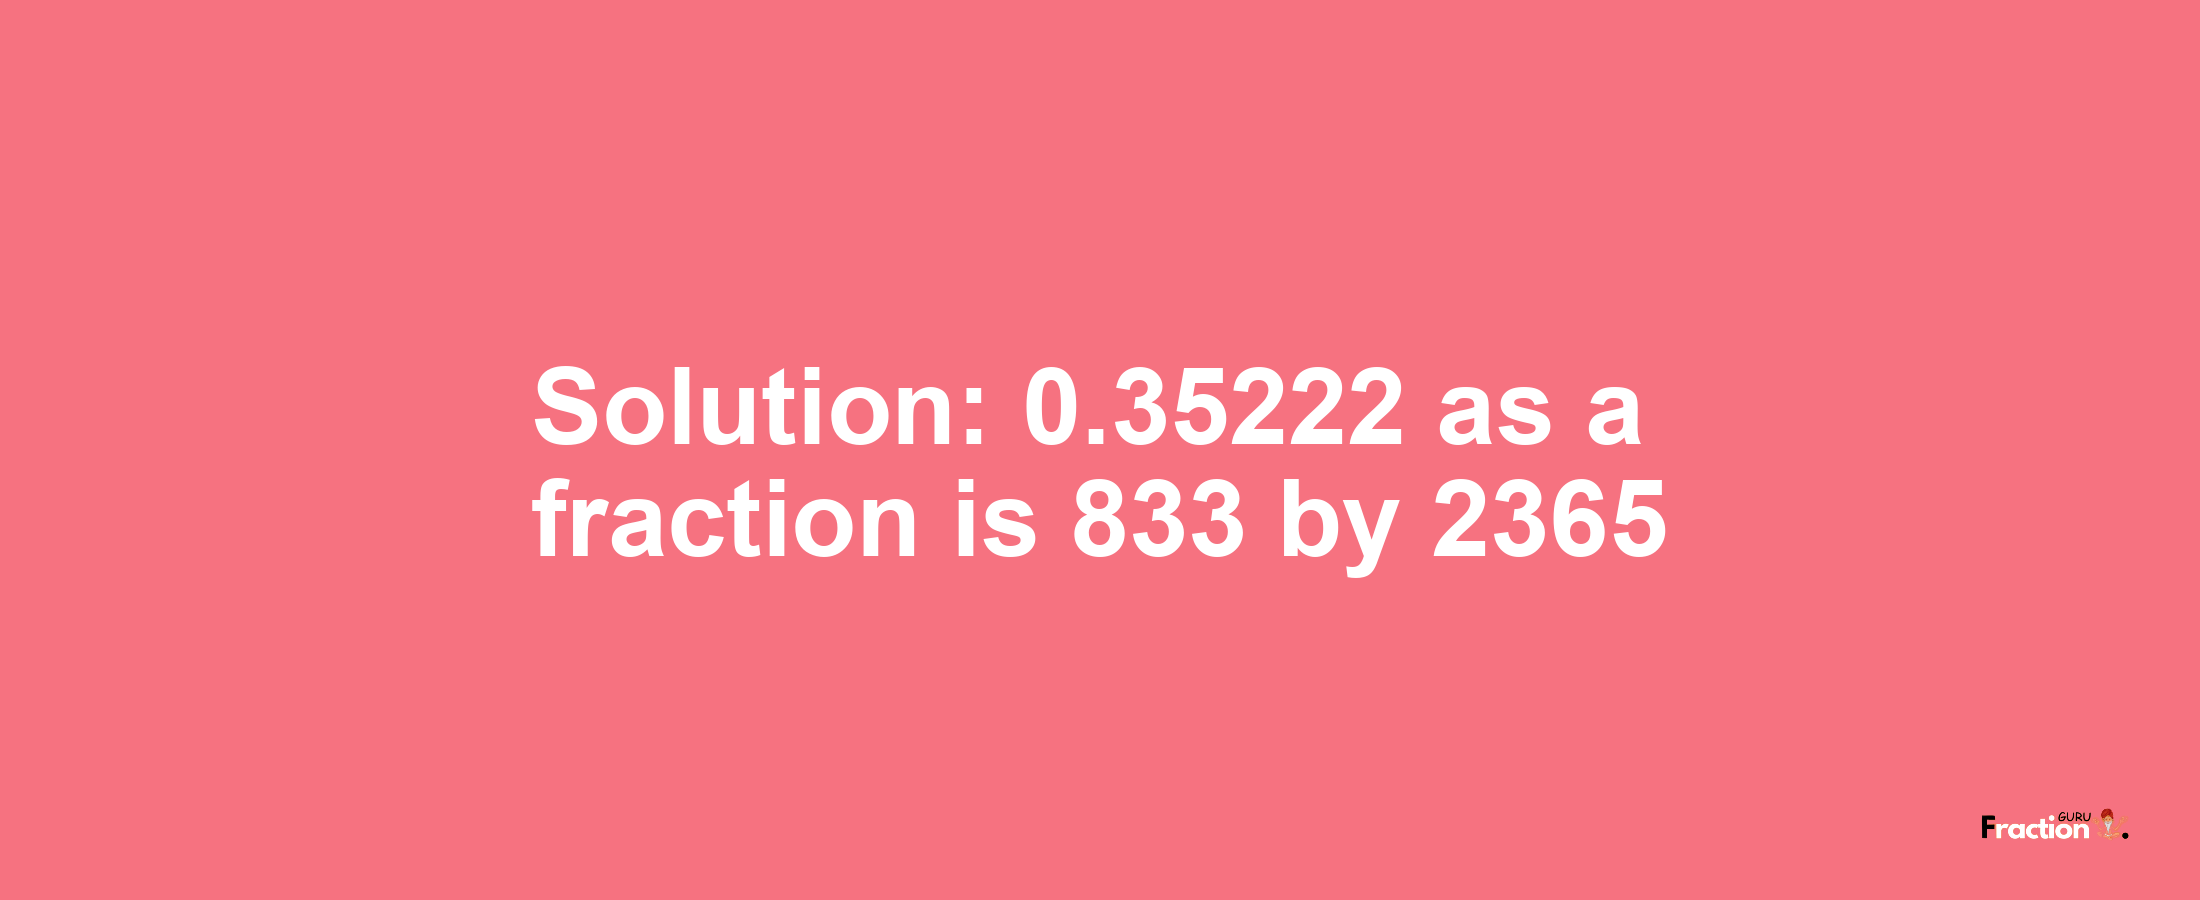 Solution:0.35222 as a fraction is 833/2365